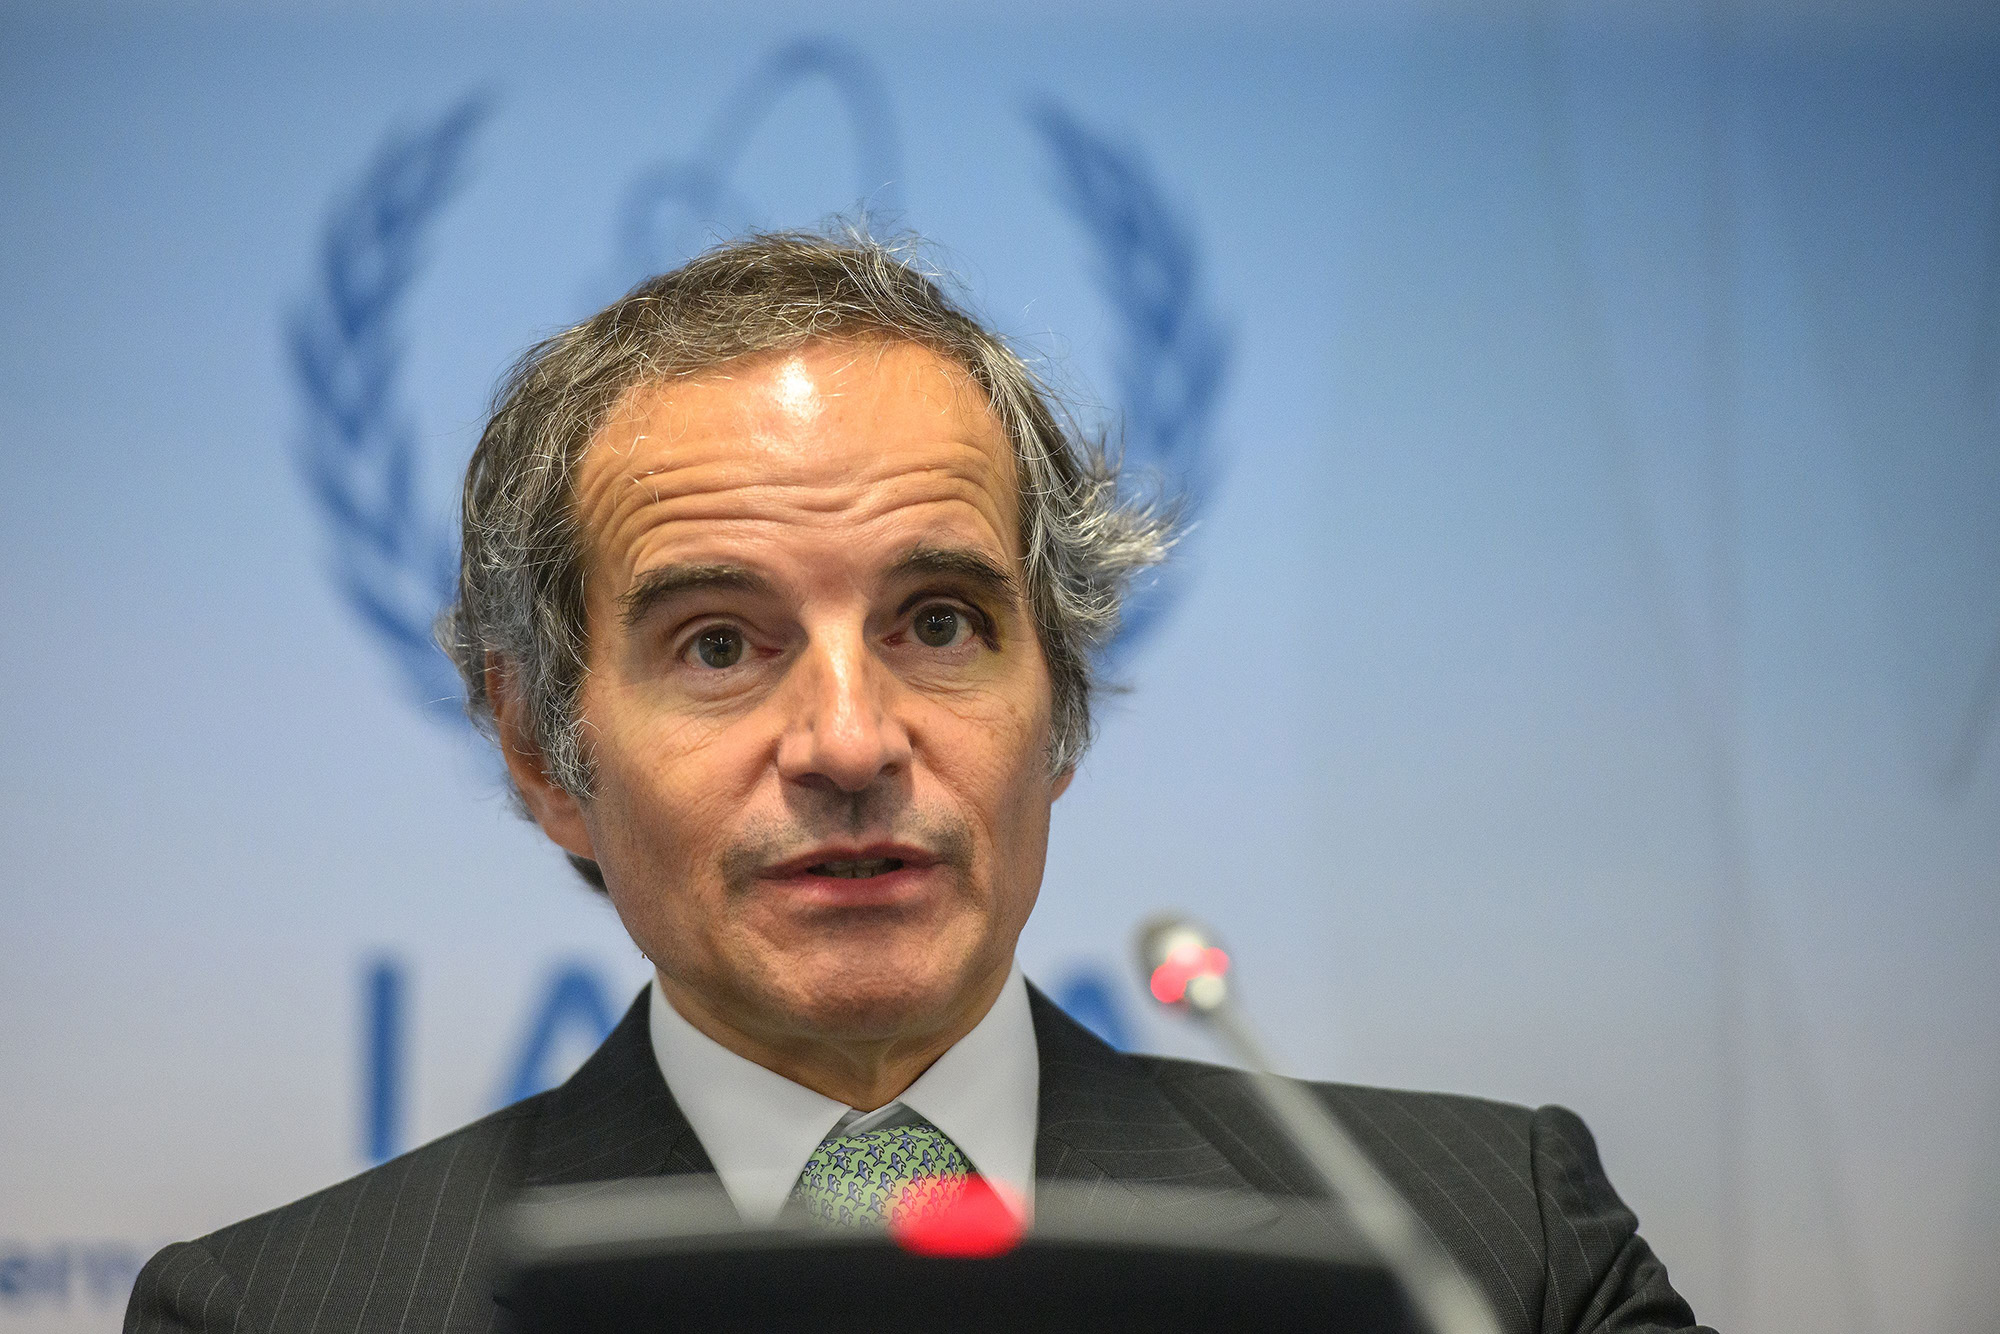 Director General of the International Atomic Energy Agency (IAEA) Rafael Mariano Grossi attends a press conference at the IAEA headquarters in Vienna, Austria, on June 6.